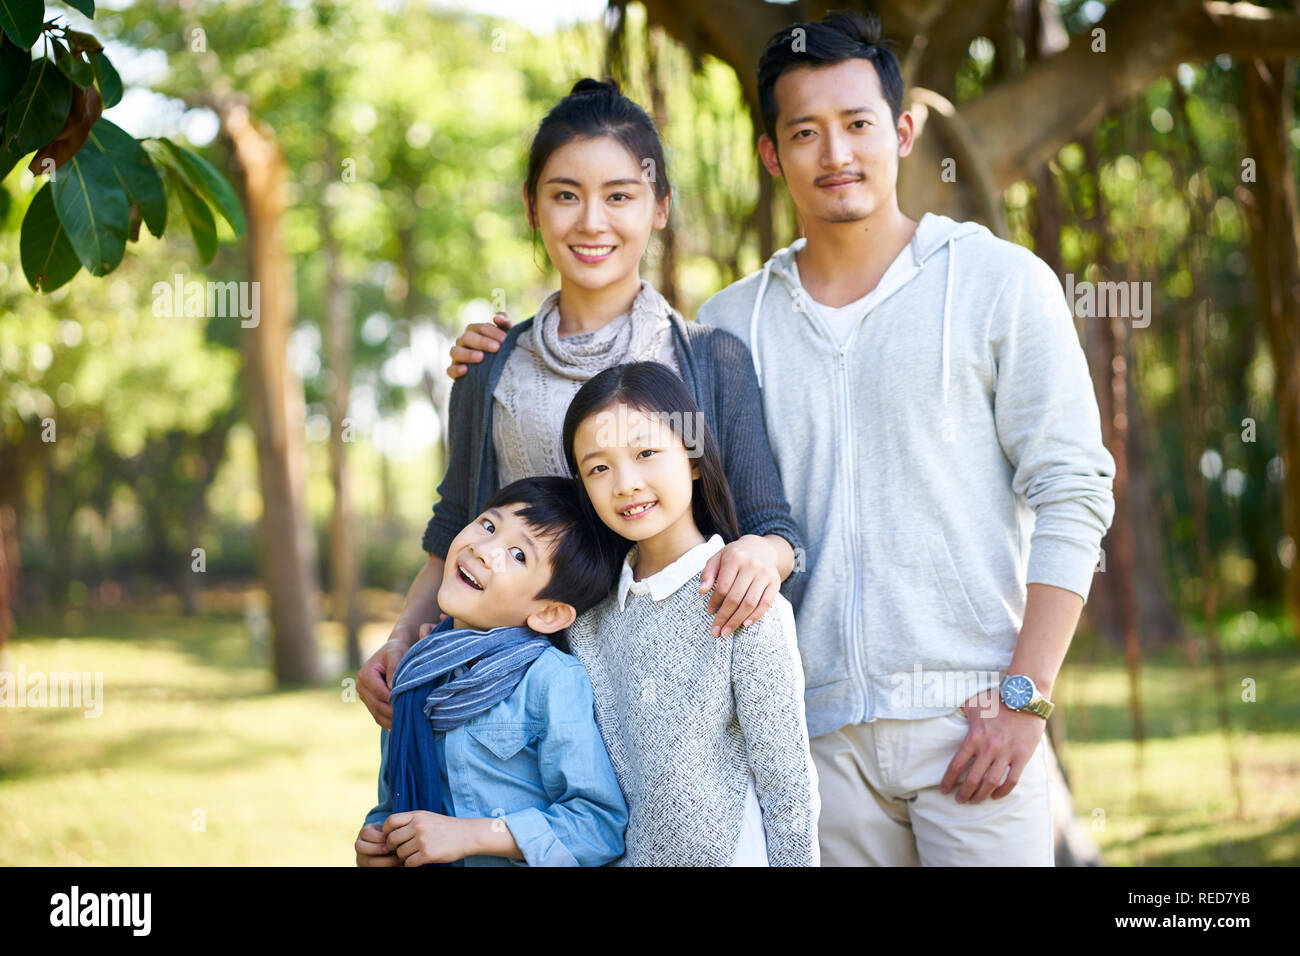 outdoor portrait of an asian family with two children. Stock Photo